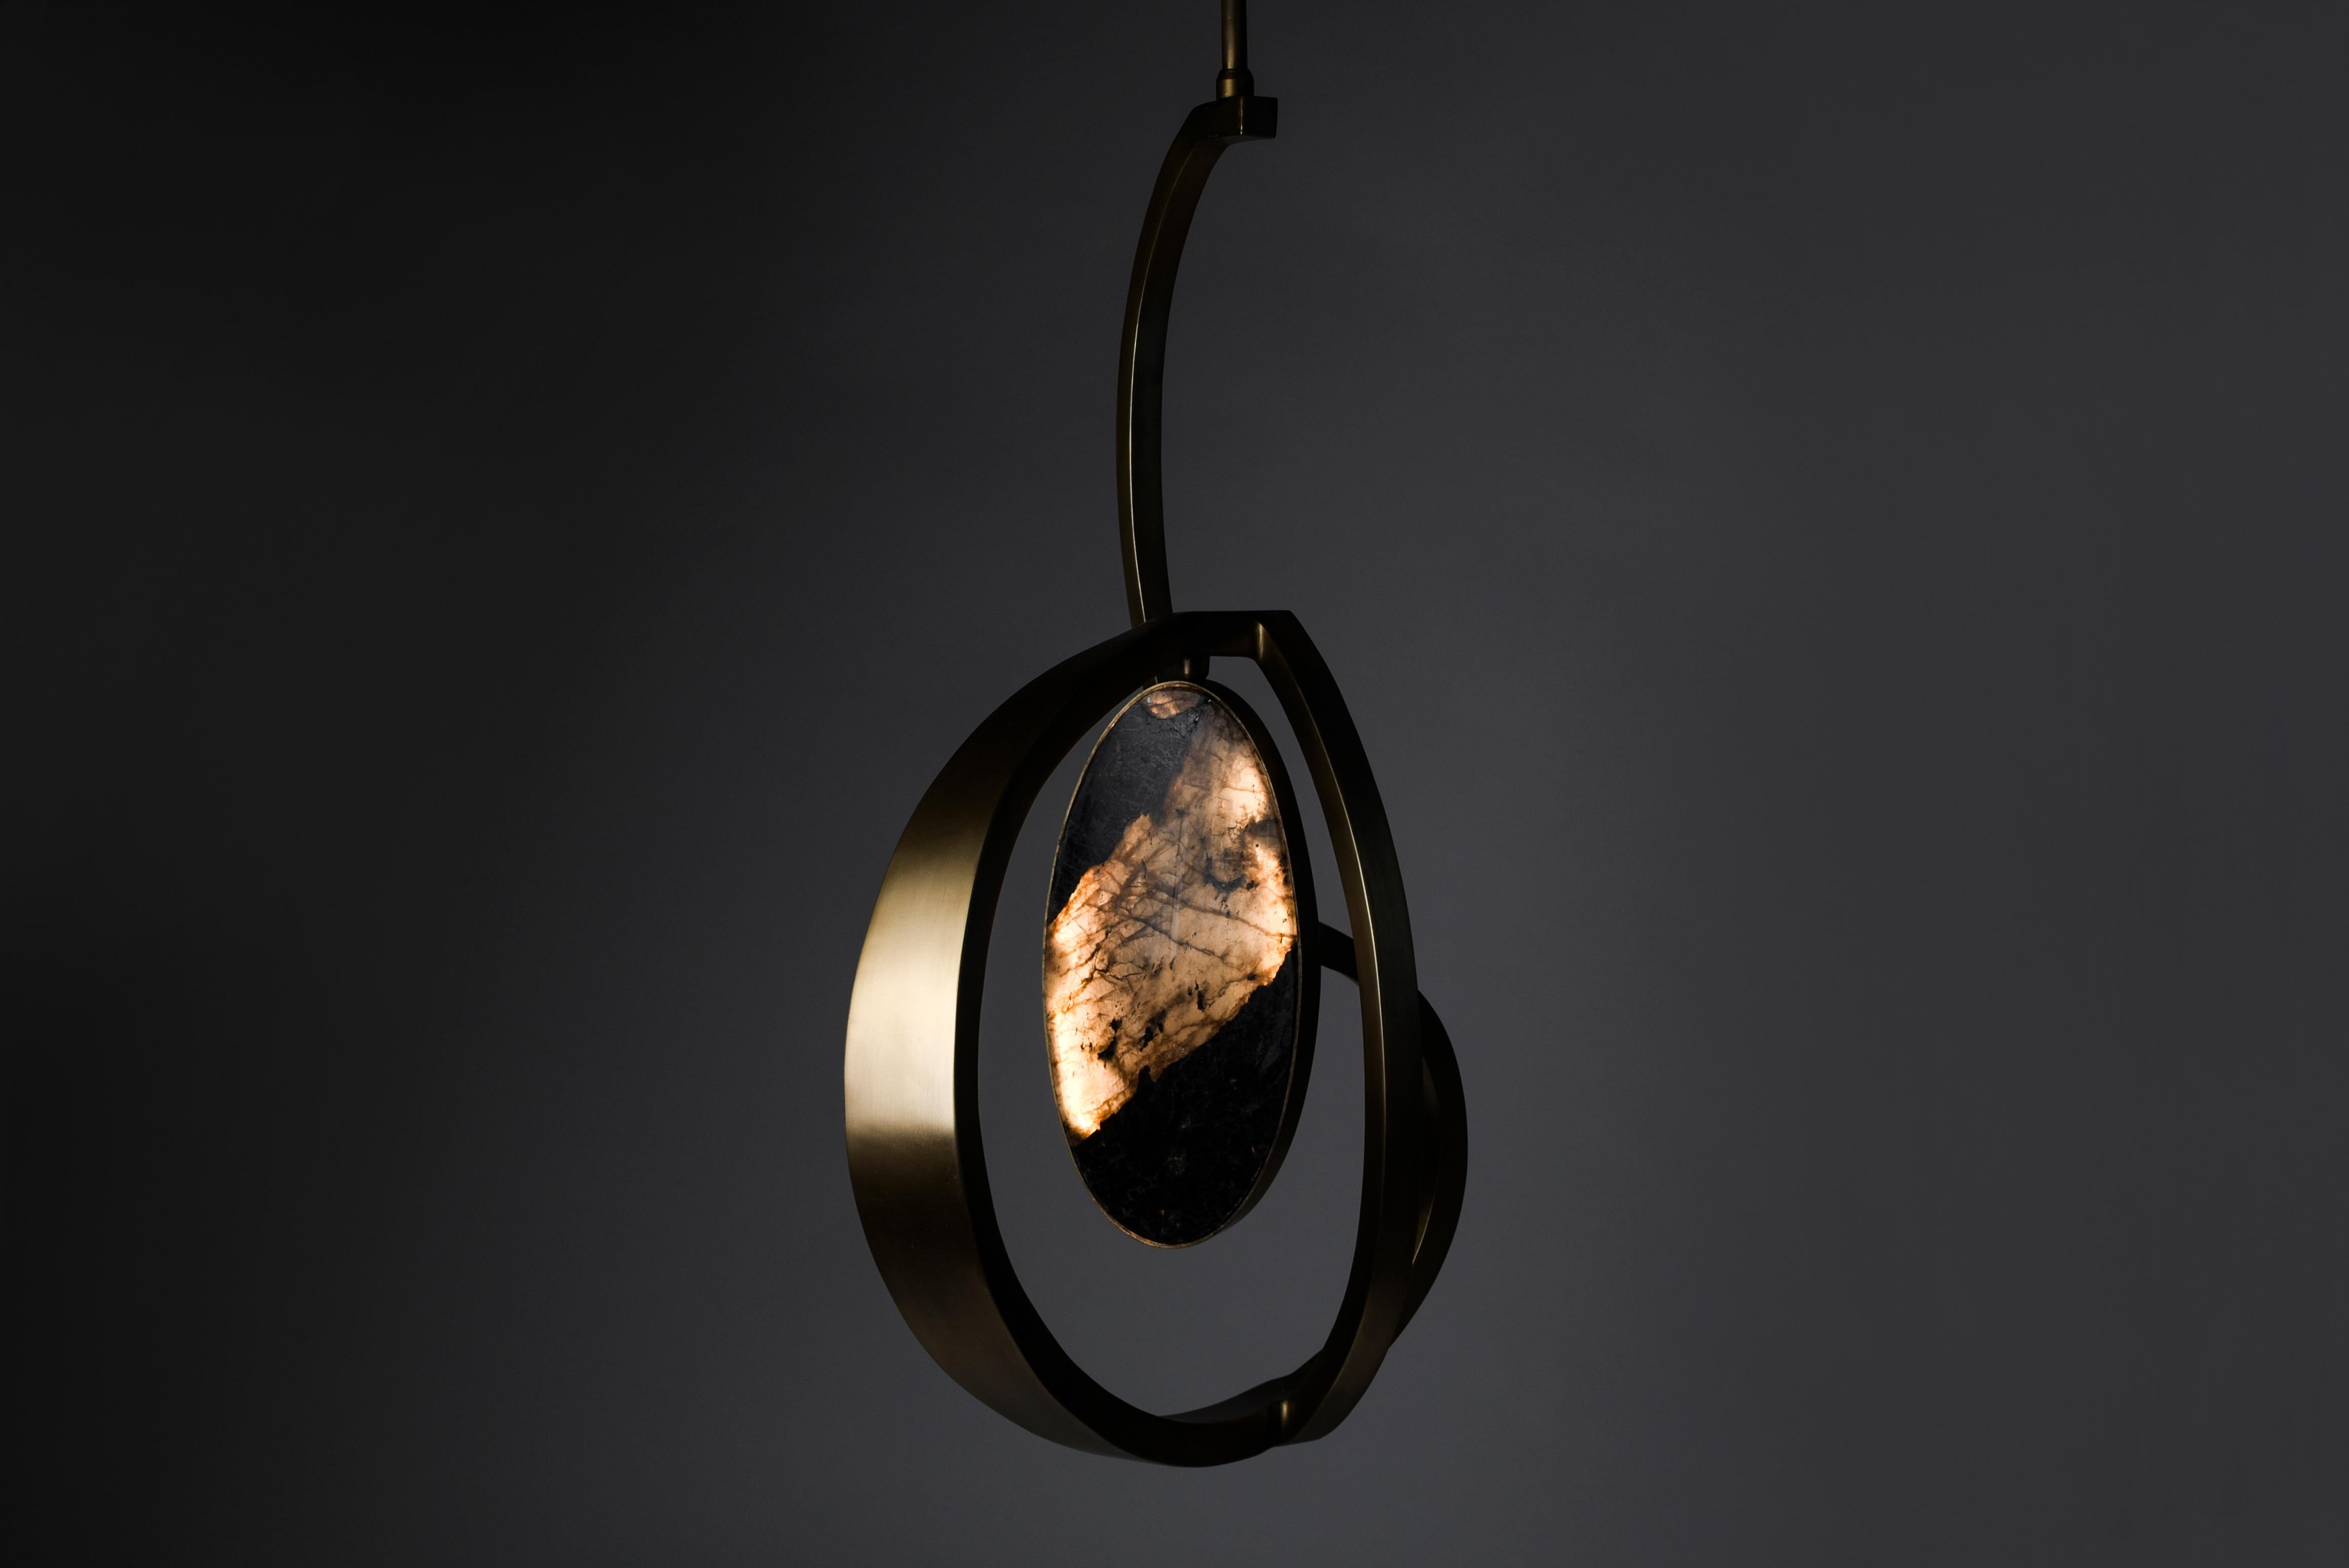 Hand-Crafted Prima Dancer Ceiling Light in Lemurian and Brass by Patrick Coard, Paris For Sale